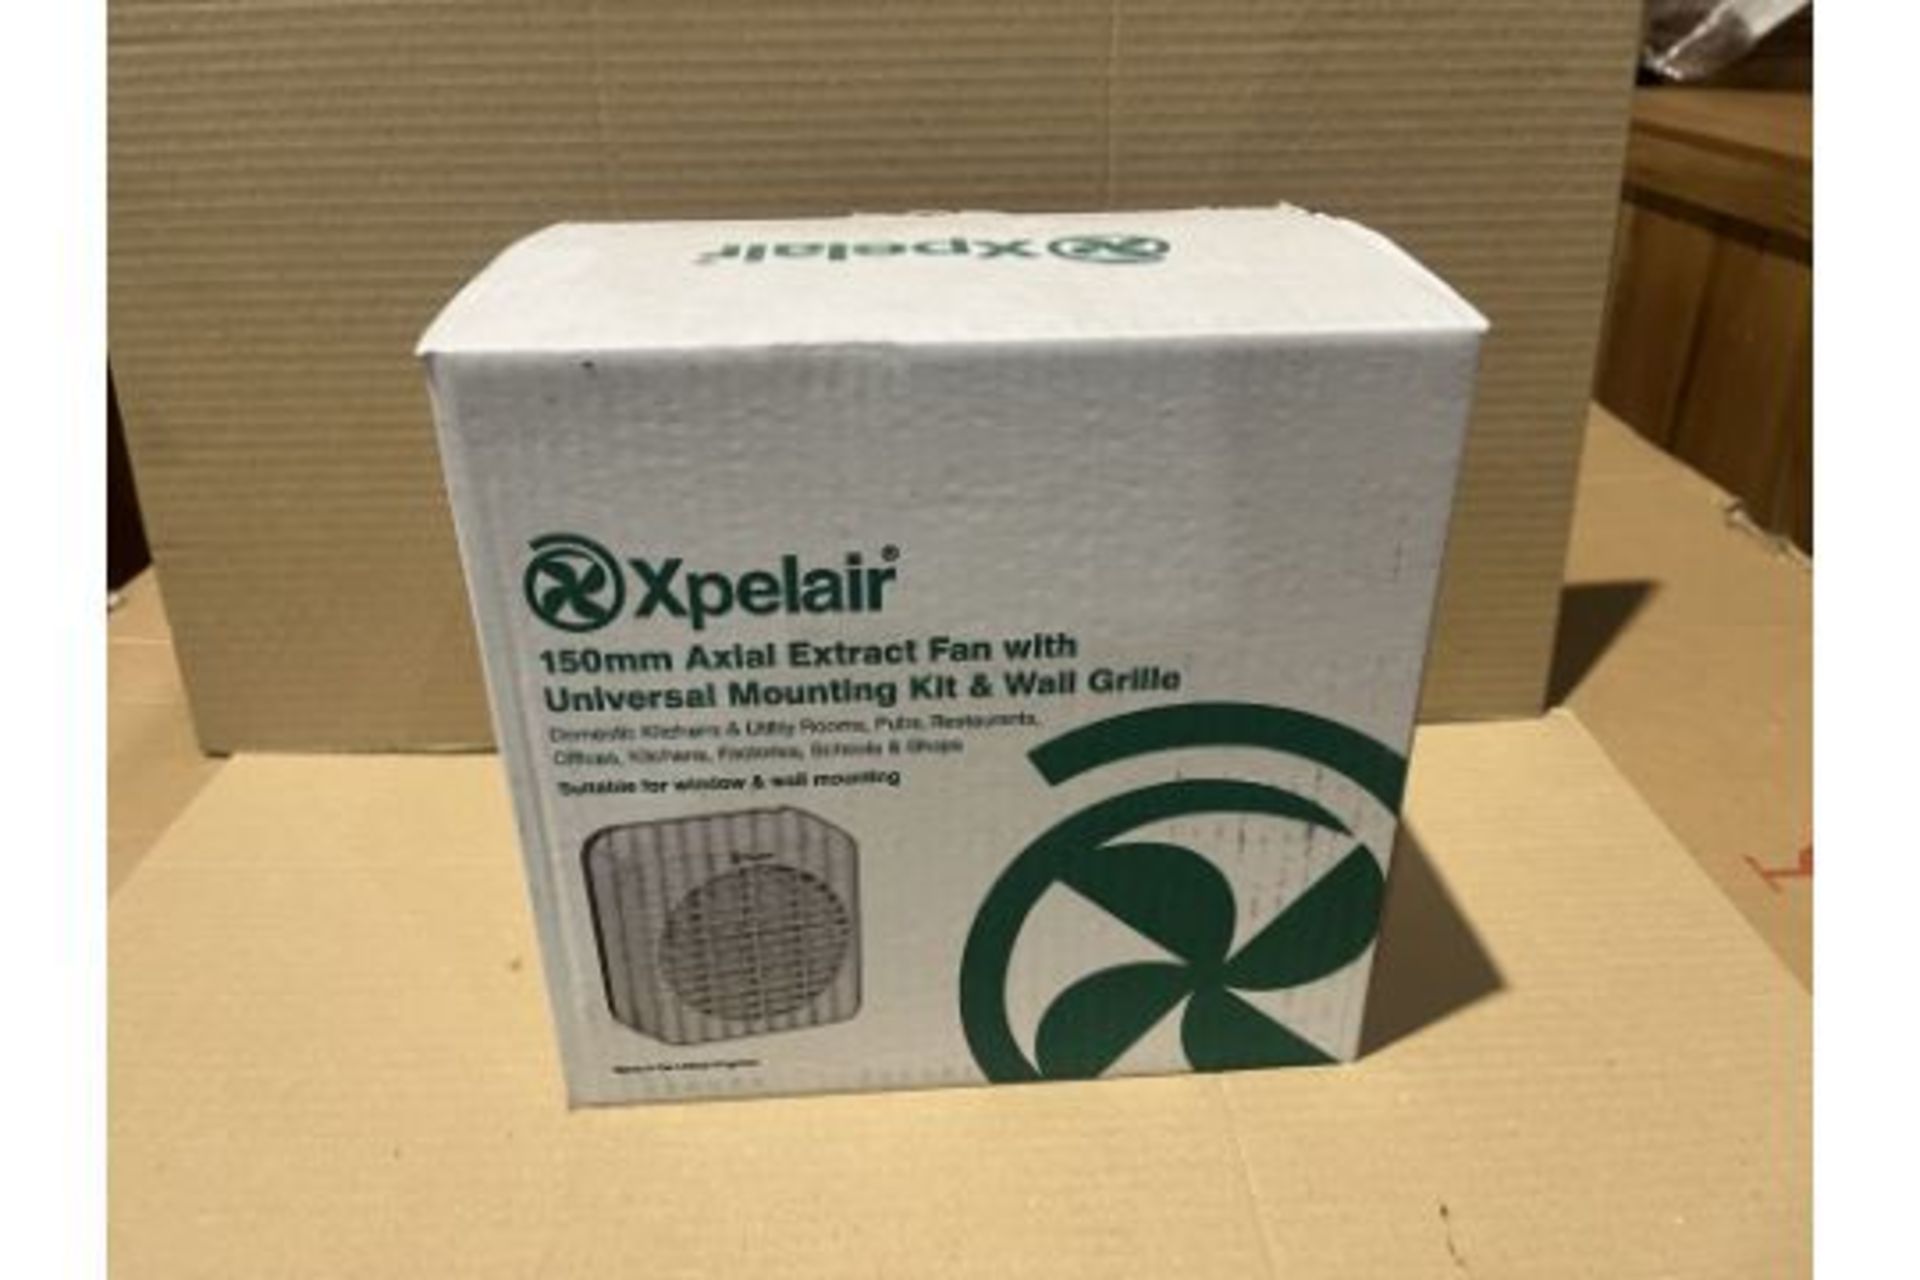 BRAND NEW XPELAIR 150MM AXIAL EXTRACT FAN WITH UNIVERSAL MOUNTING KIT AND WALL GRILL R11-1